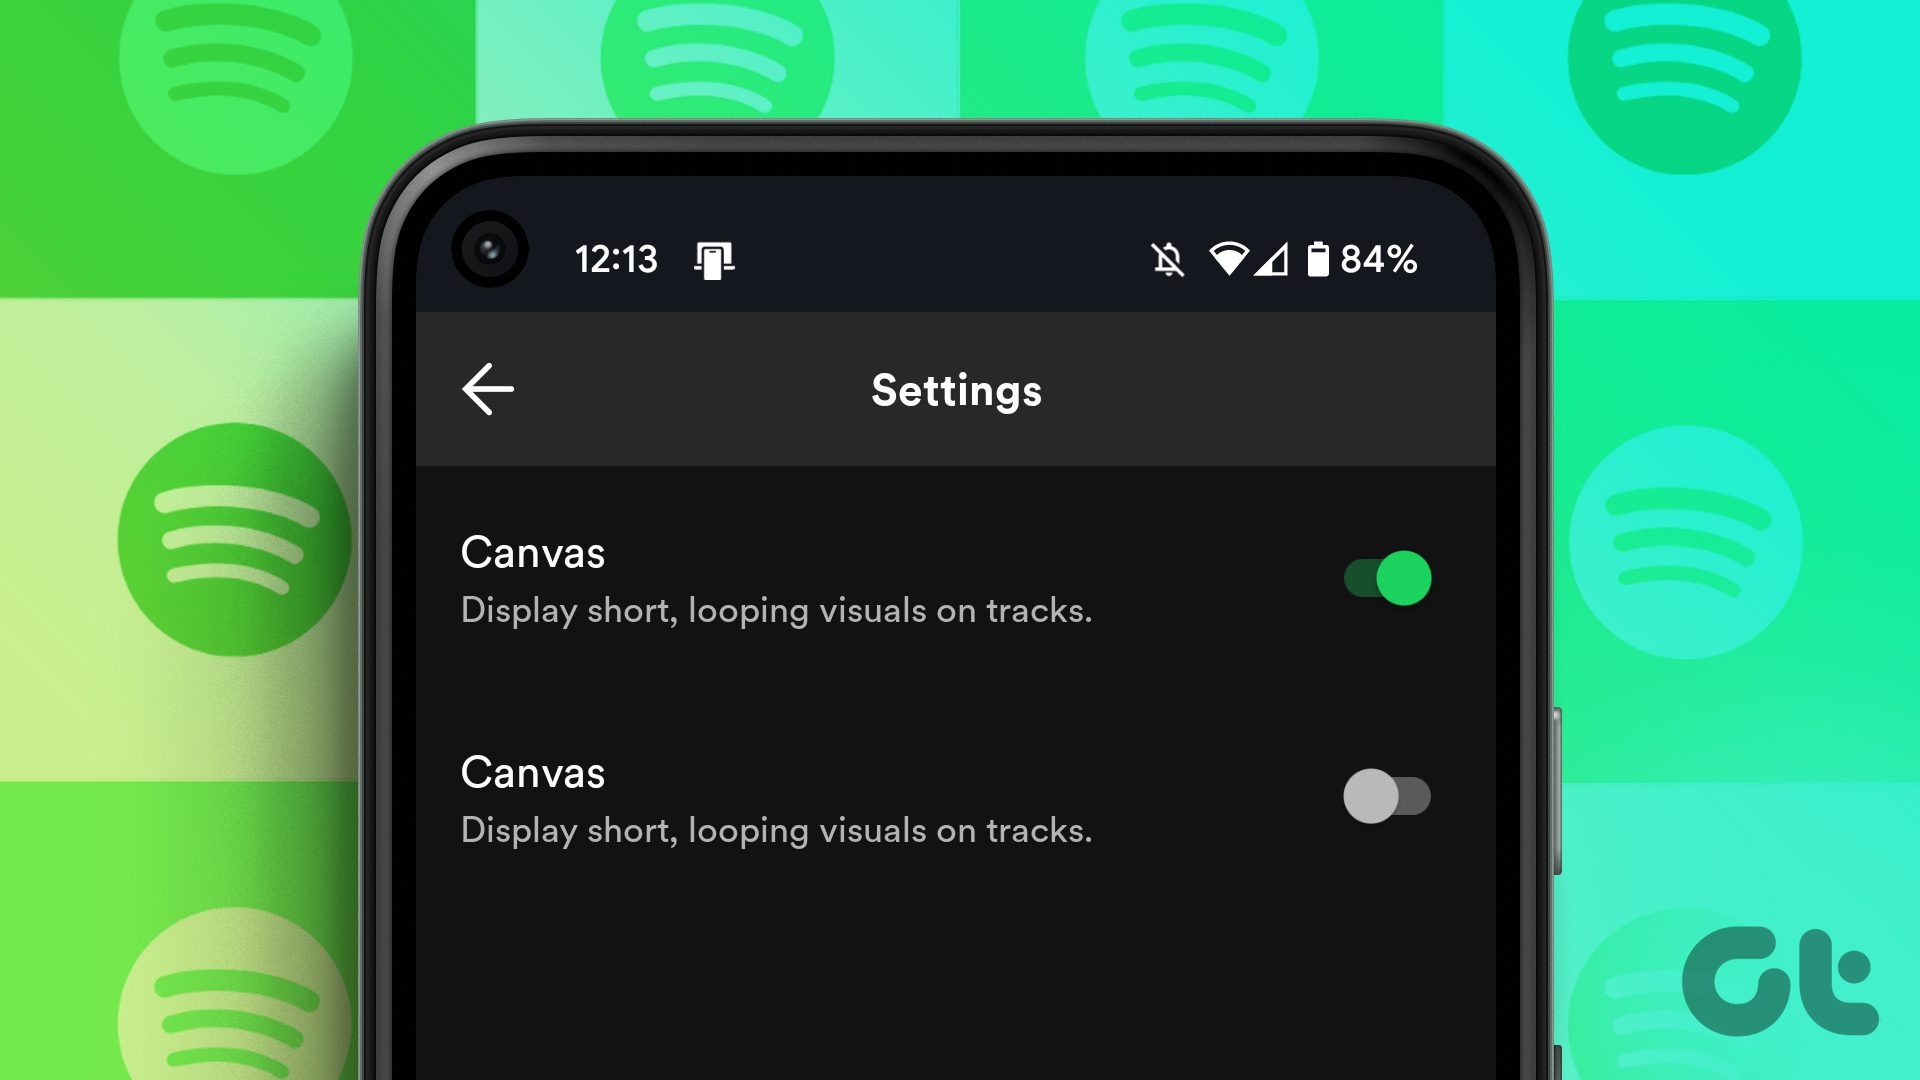 Turn On or Off Canvas on Spotify